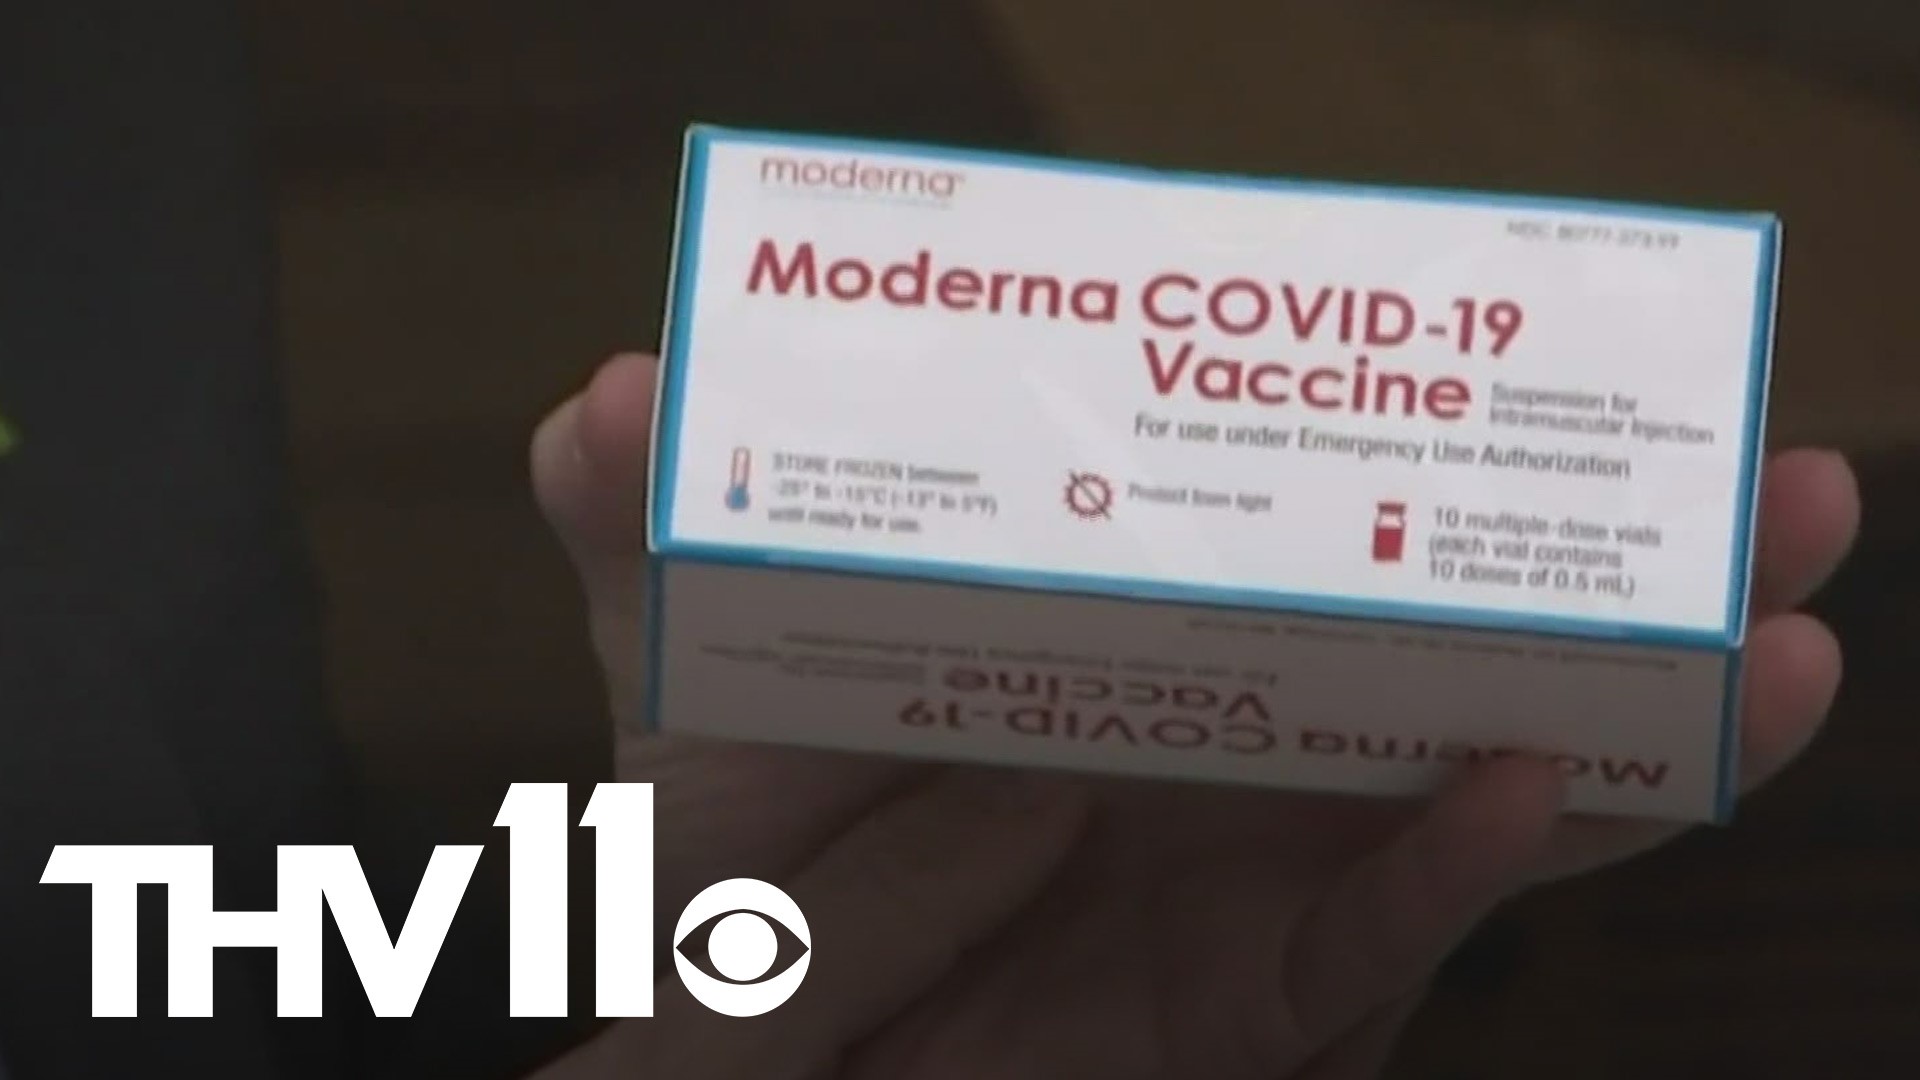 You may notice your teachers, grandparents, or others around you have already received the COVID-19 vaccine.